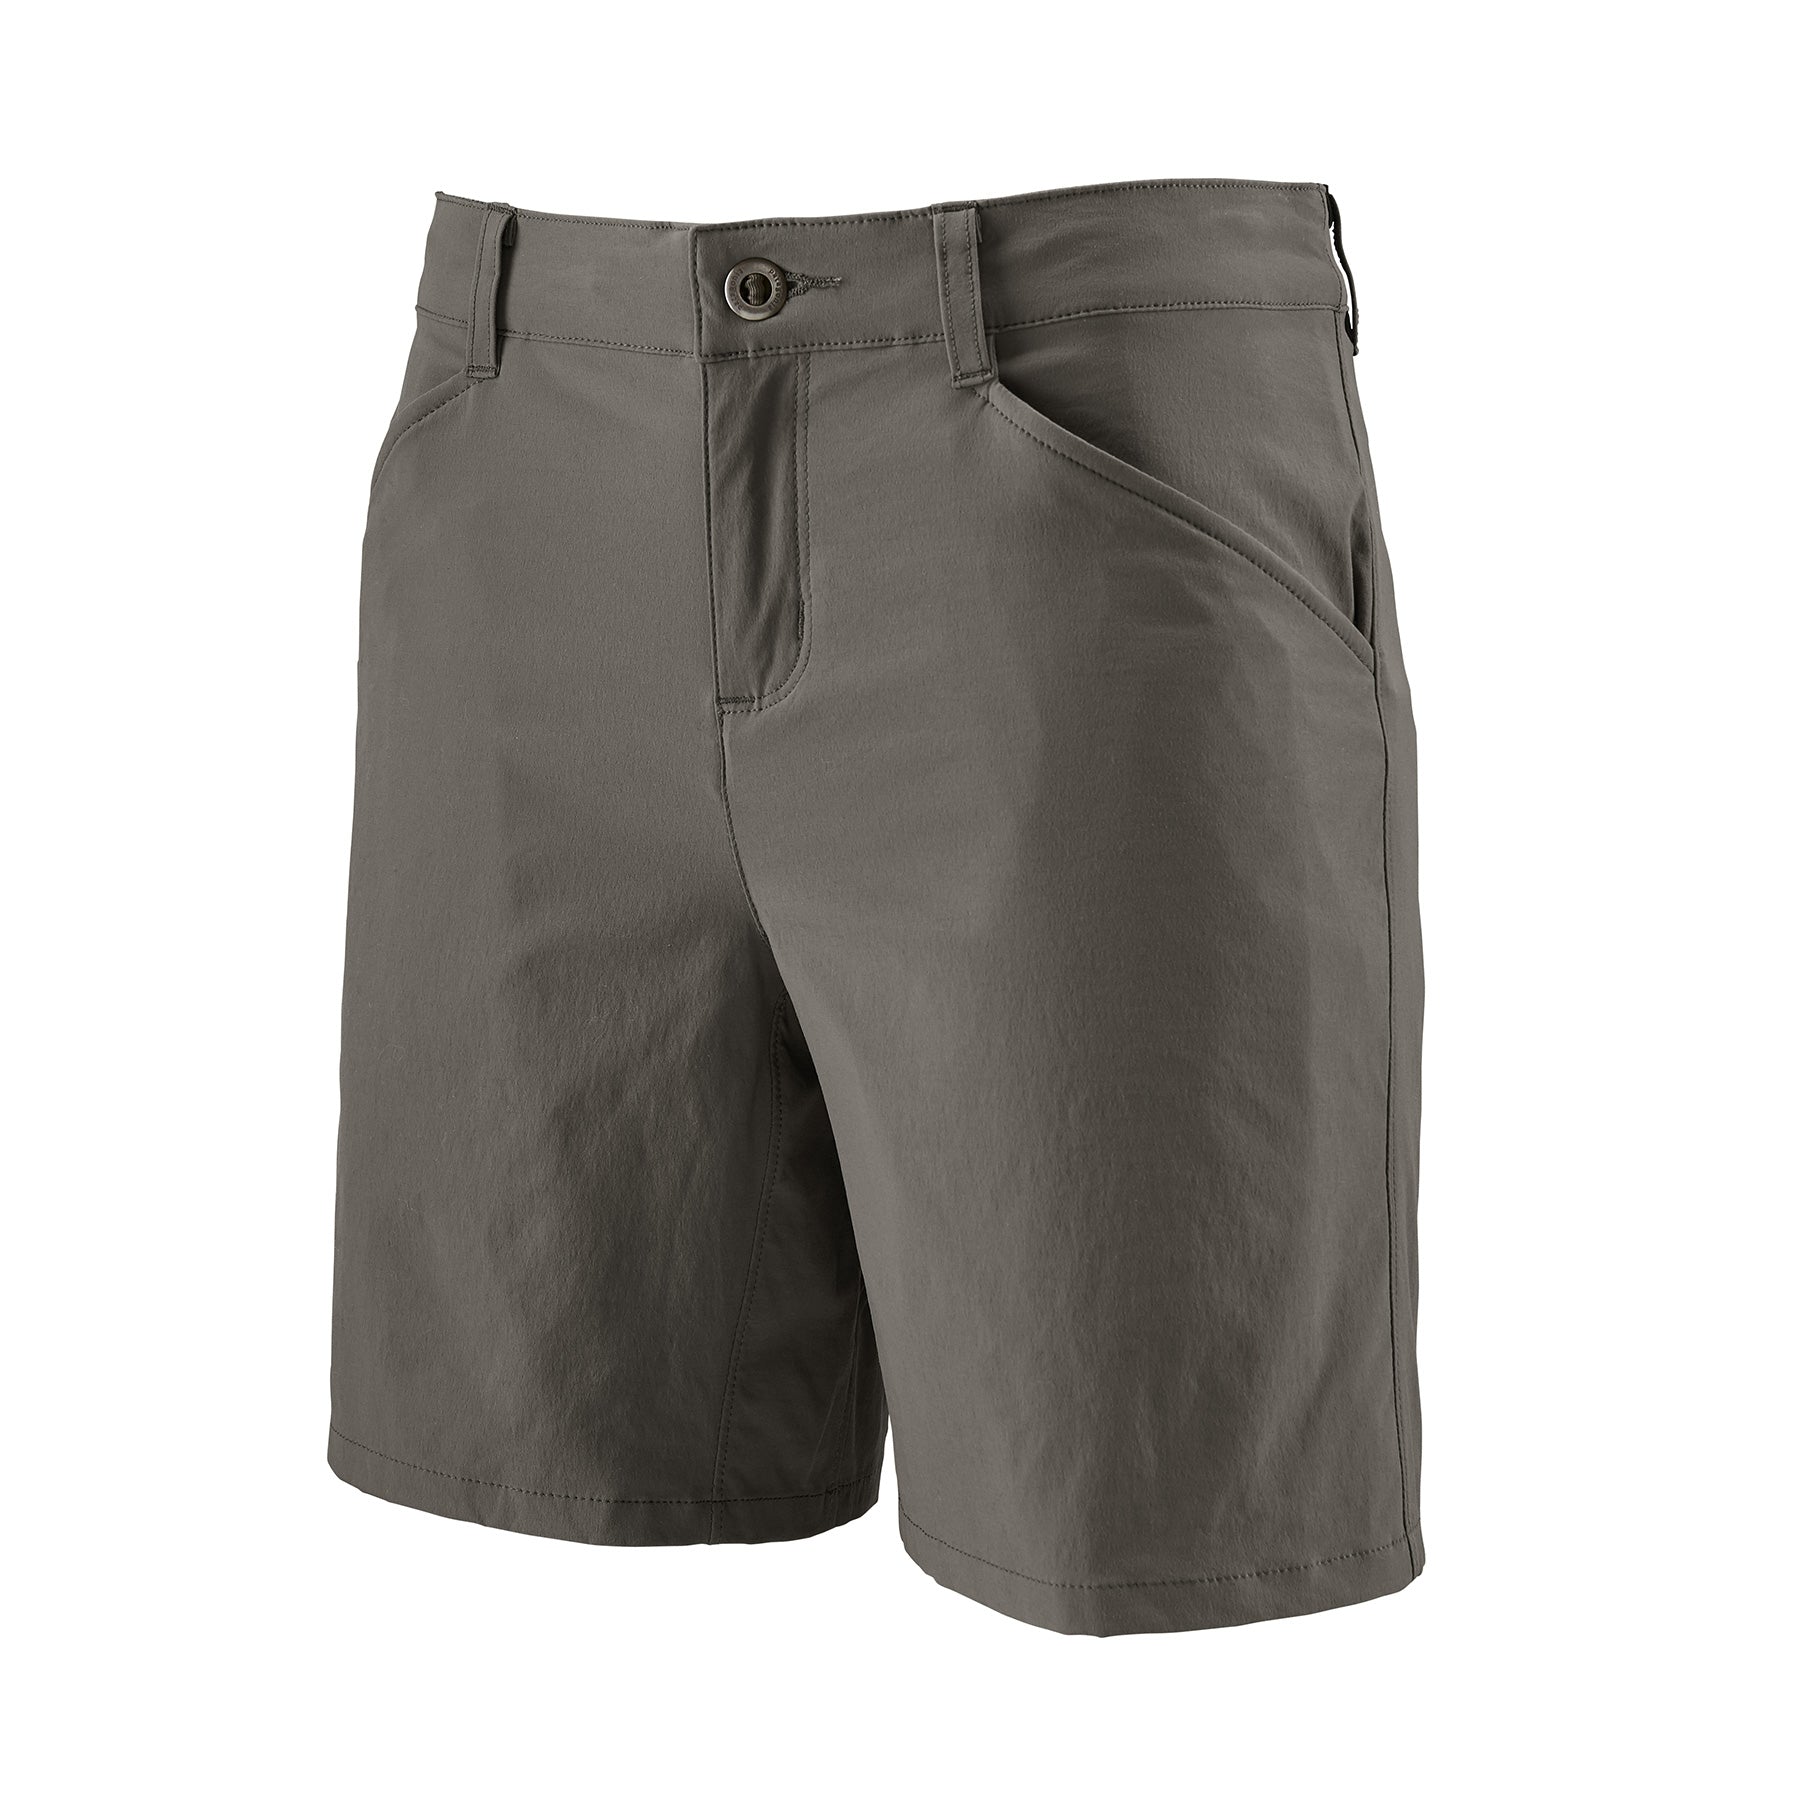 patagonia womens quandary shorts 7 inches in forge grey, three quarter view